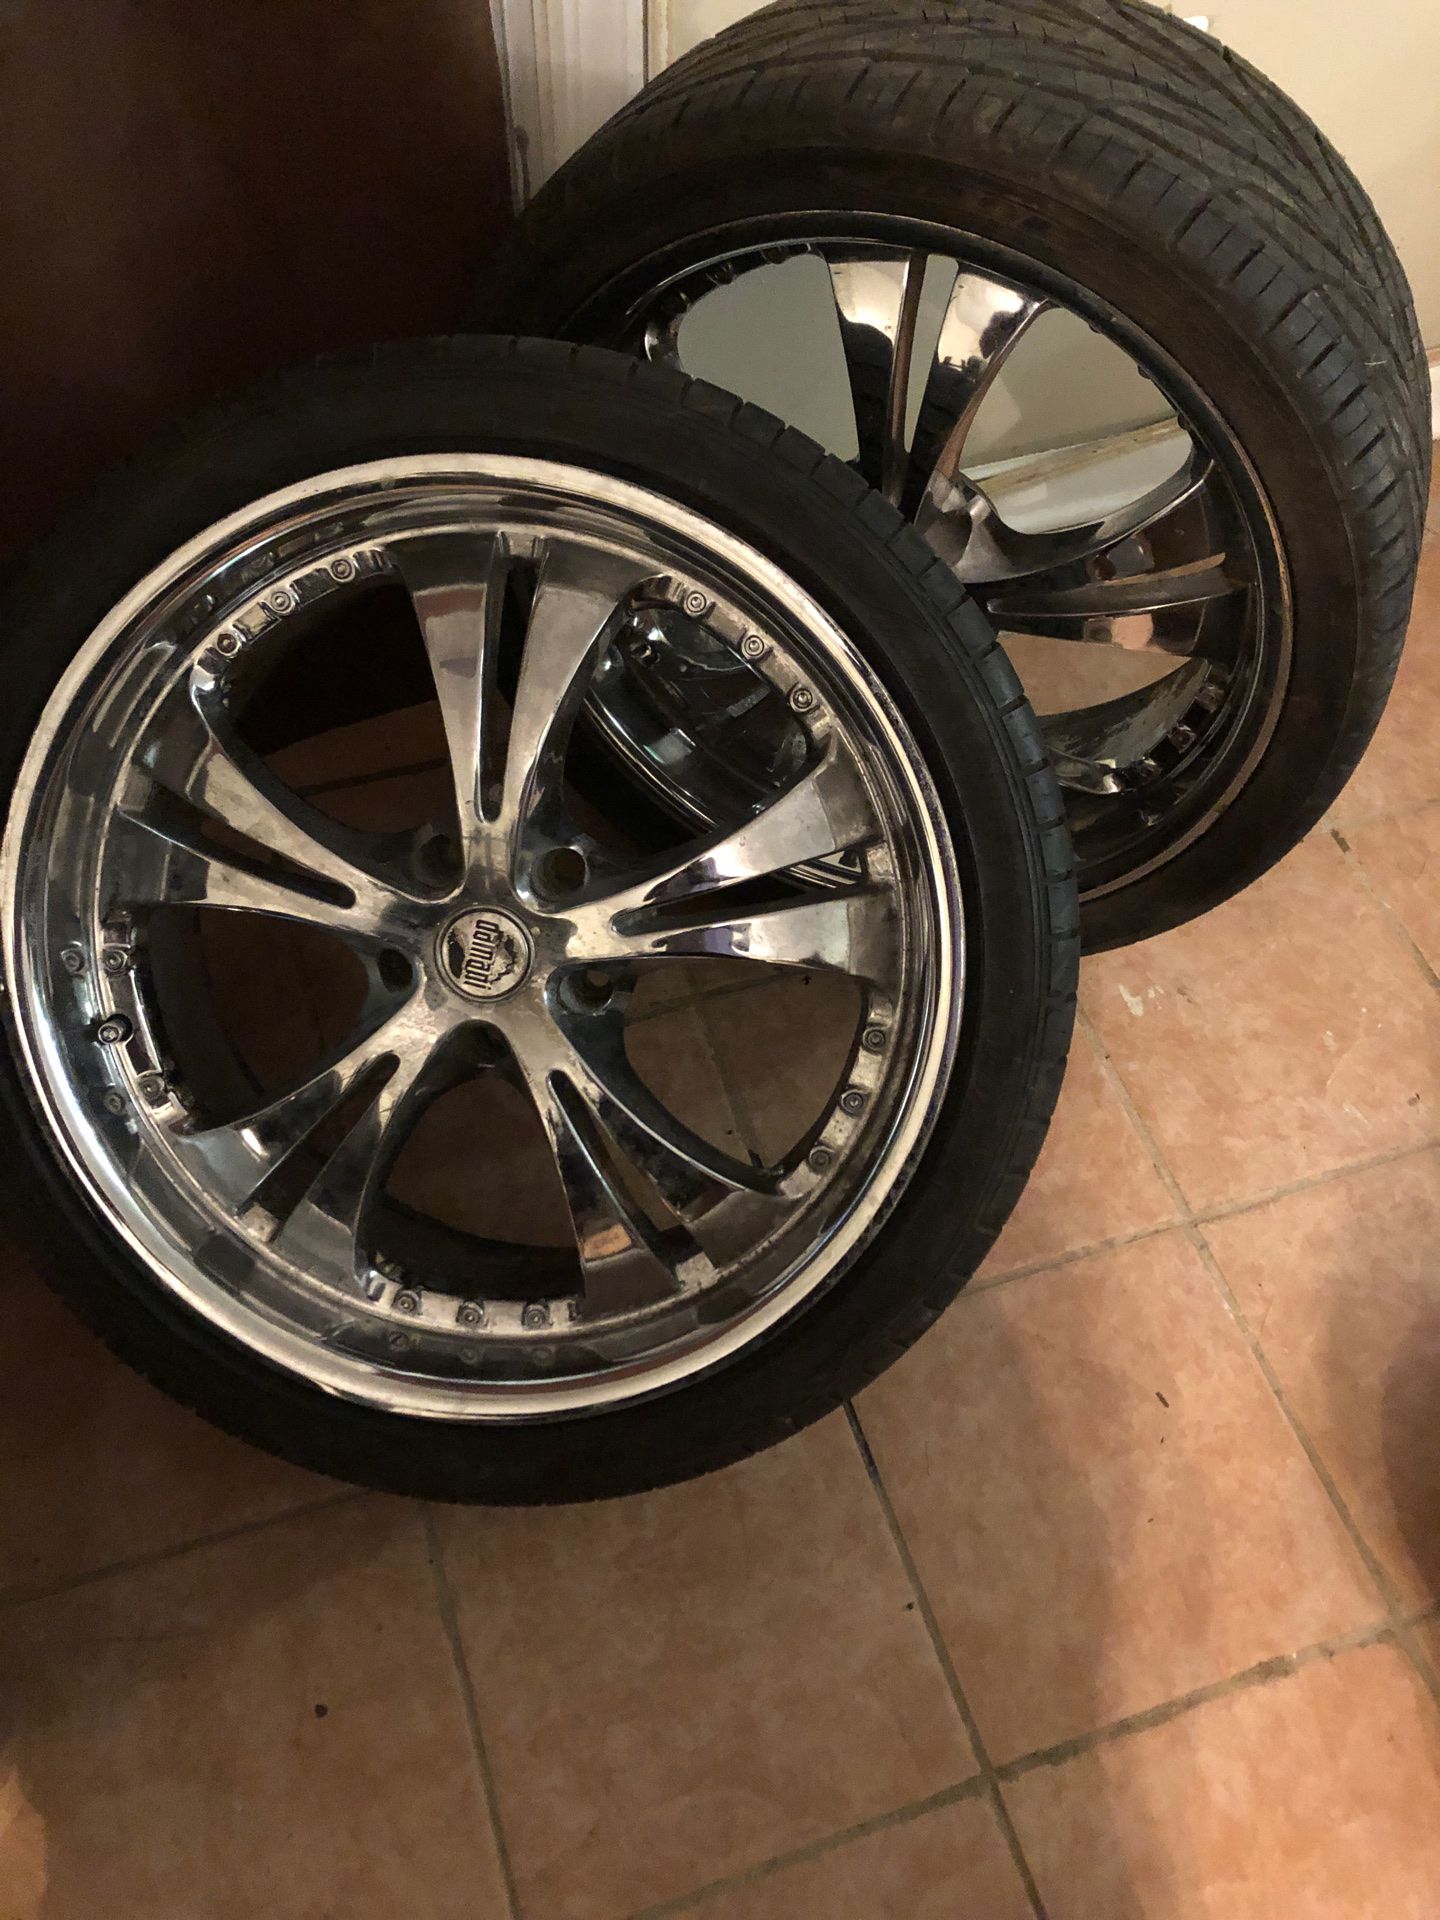 20in damani rims with 255-35-20 Goodyear eagle tires